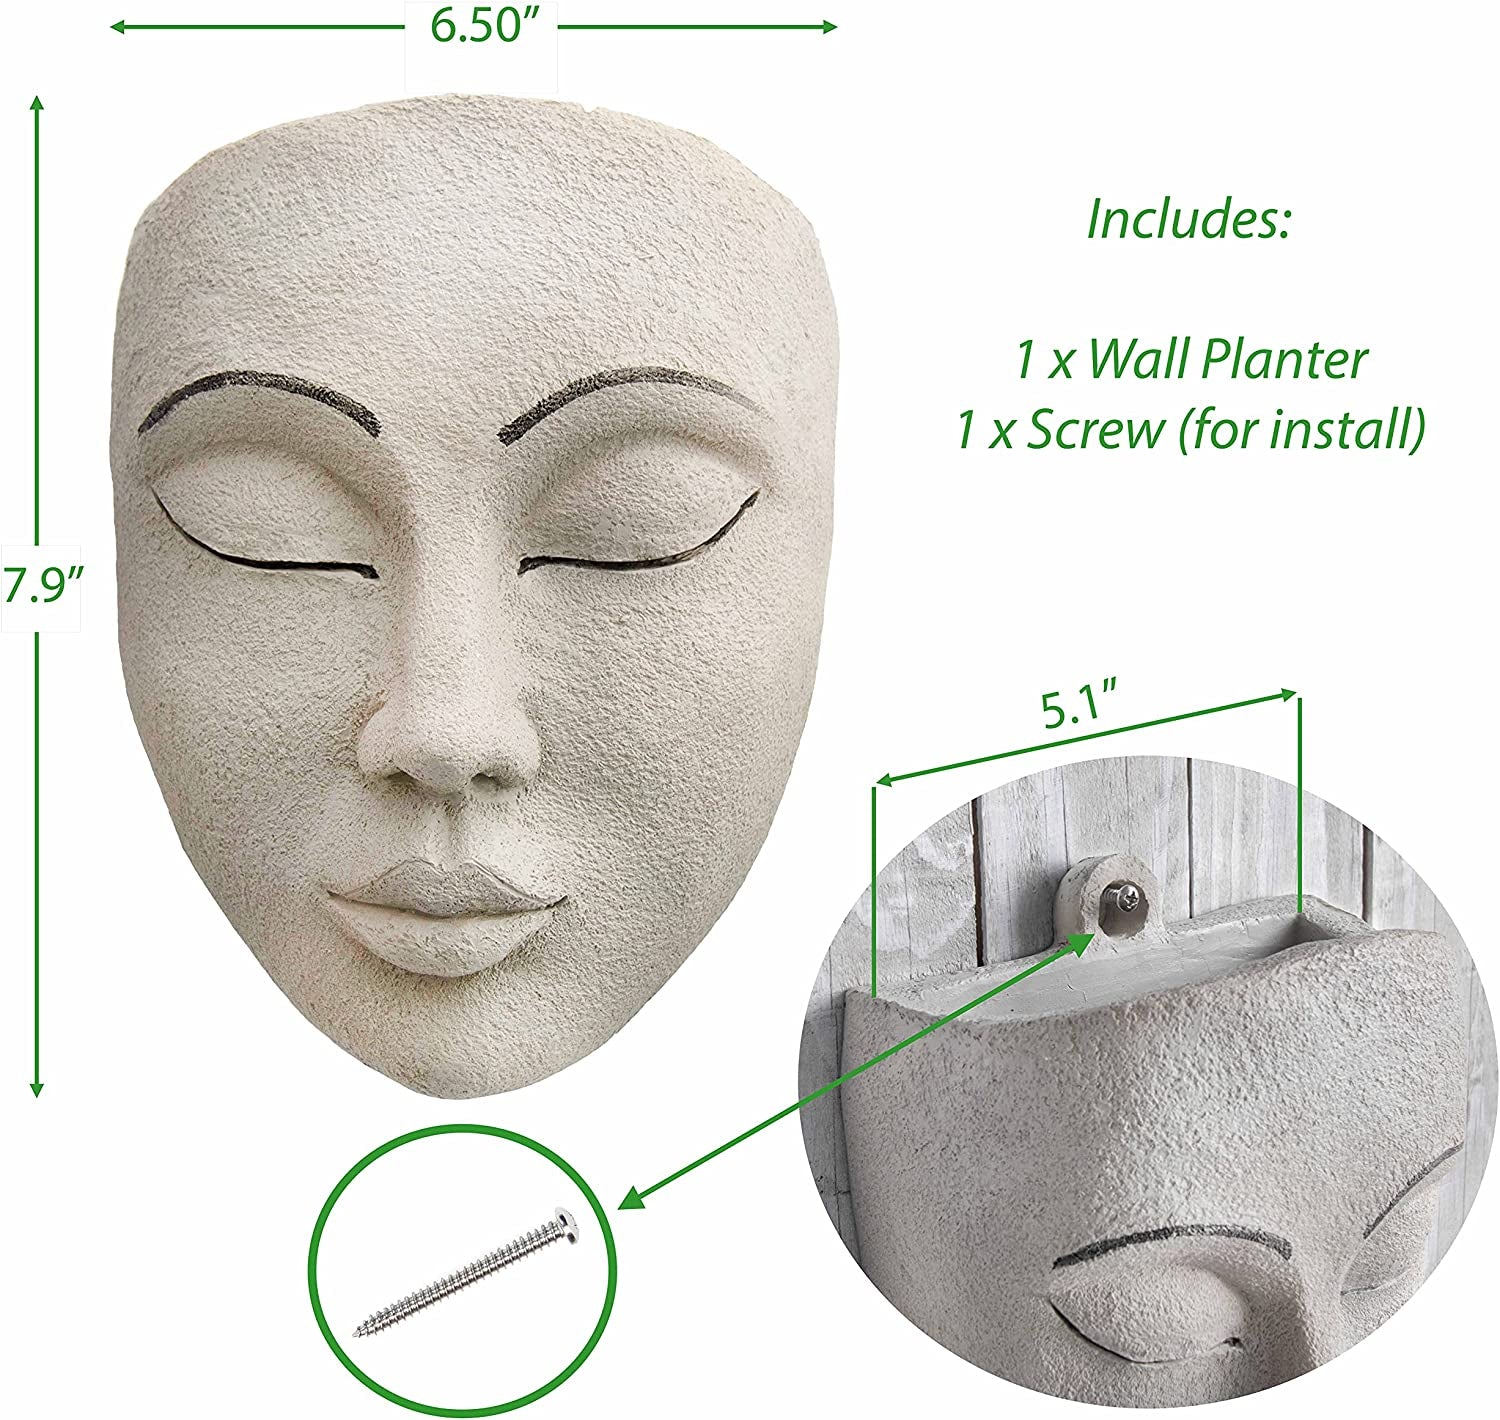 Meadow & Oak, Meadow & Oak Head Planter / Wall Mounted / Outdoor Face Planter with Drainage for Cute Plants / Resin Planter Face Pot, Planter Pots for Outdoor Plants, Cute Plant Pots, Head Planter Pot